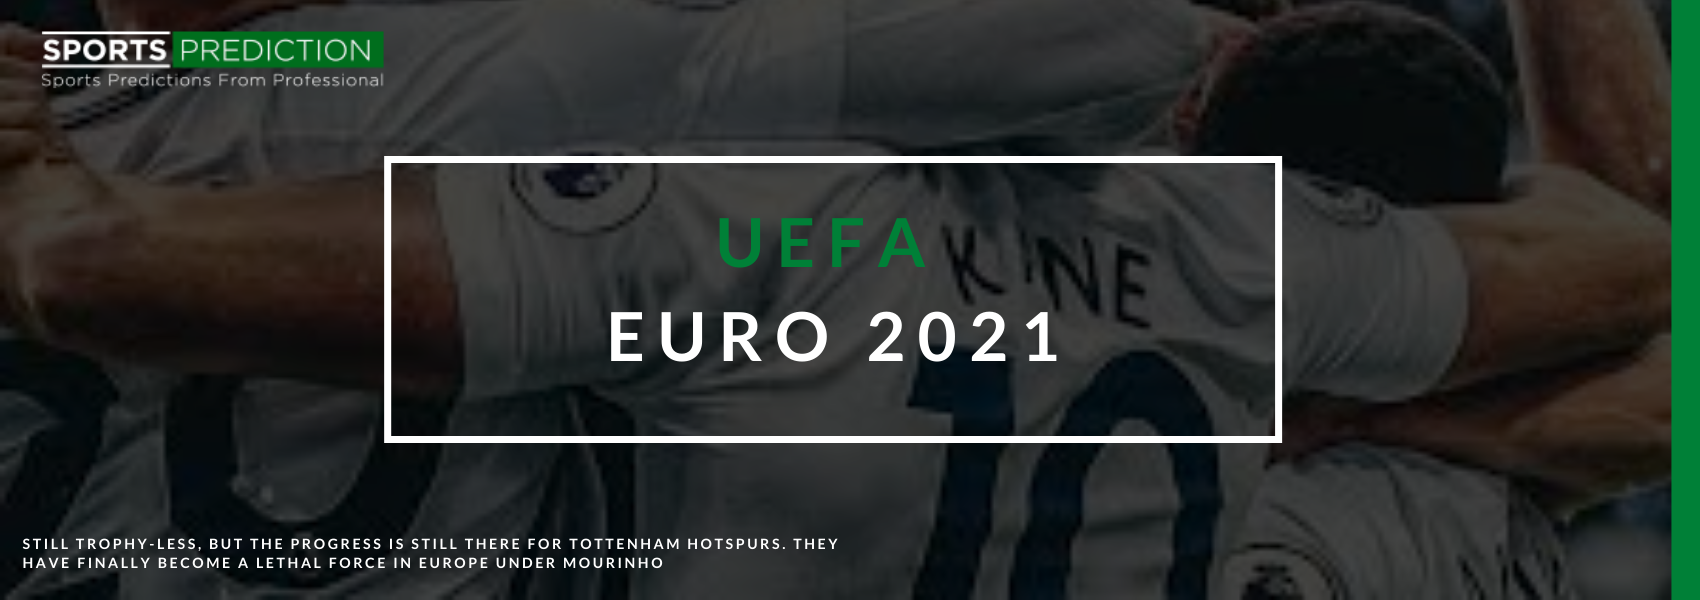 Here's What You Should Know About UEFA EURO 2021